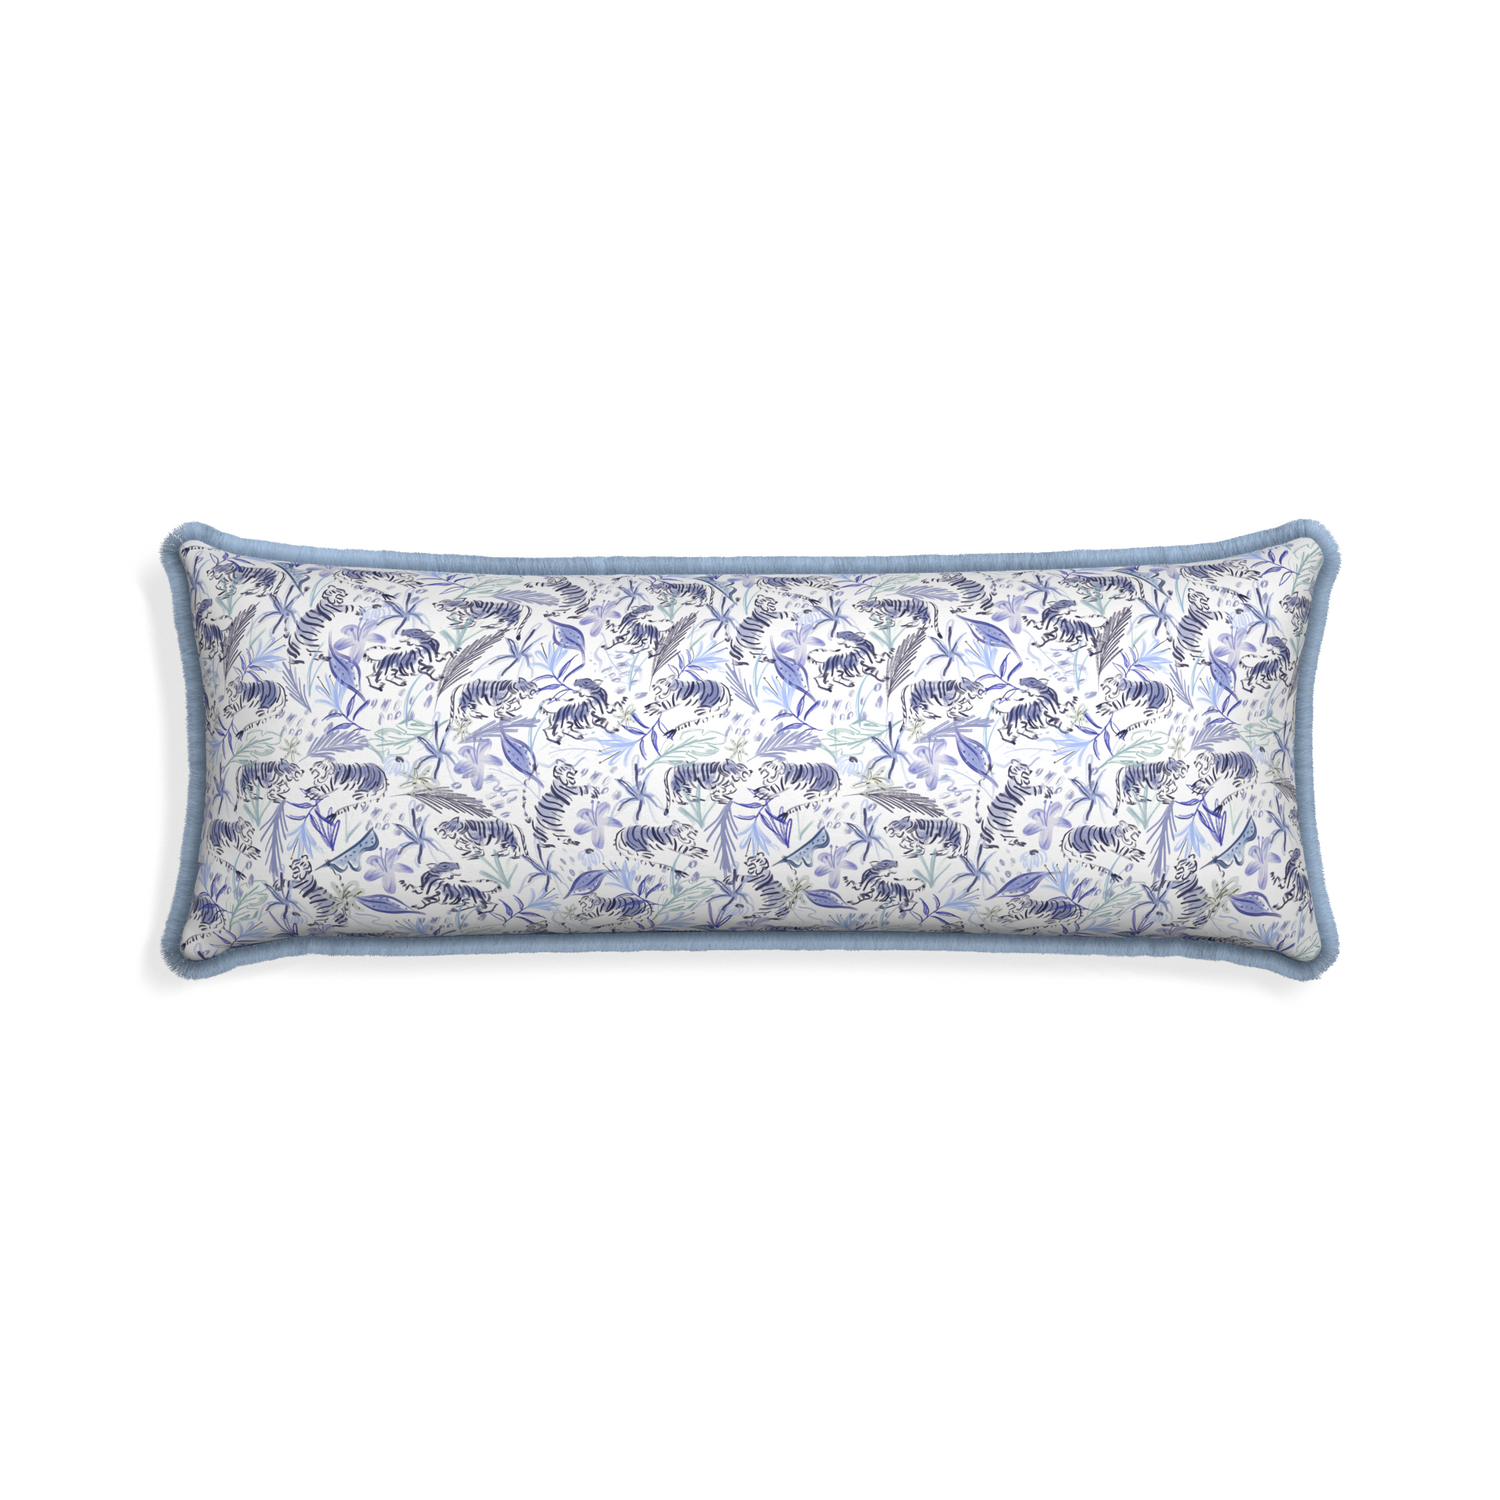 Xl-lumbar frida blue custom blue with intricate tiger designpillow with sky fringe on white background